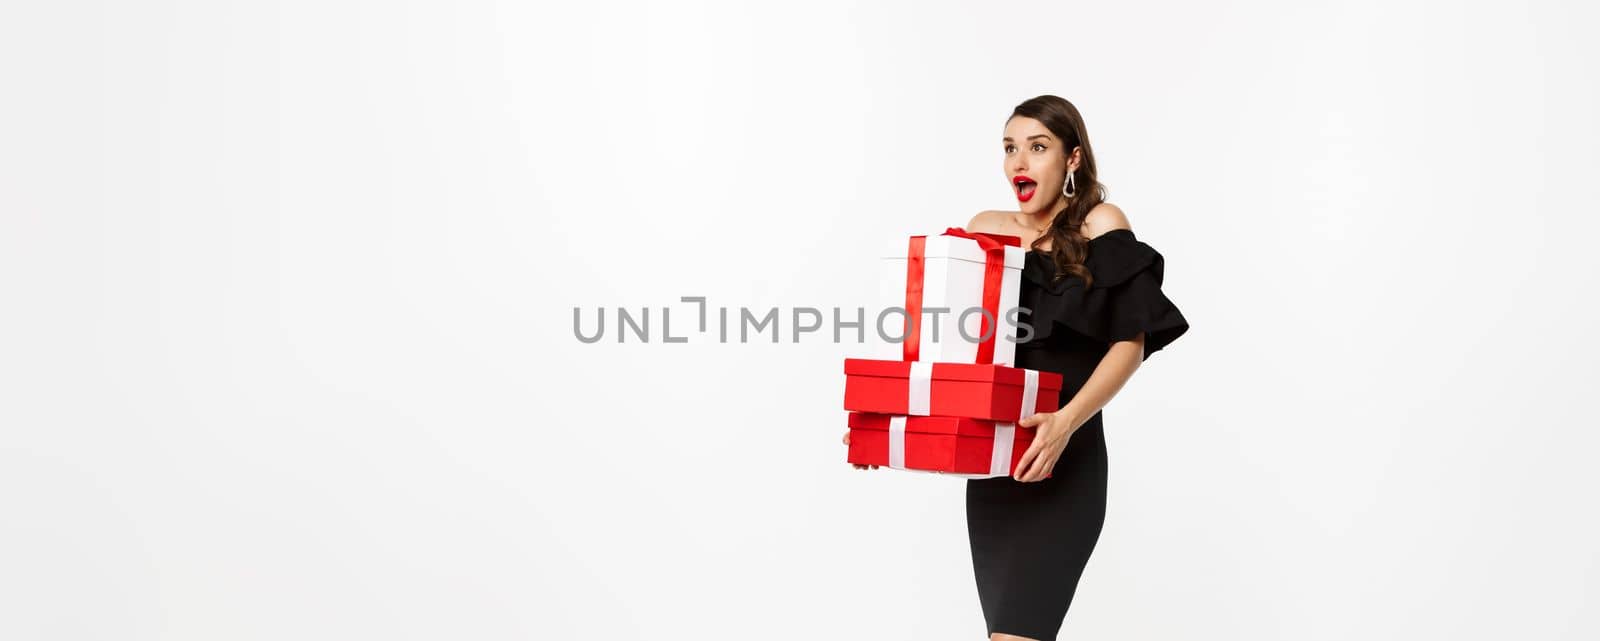 Merry christmas and new year holidays concept. Excited and happy woman in black dress holding xmas presents, looking surprised at logo. standing with presents against white background.